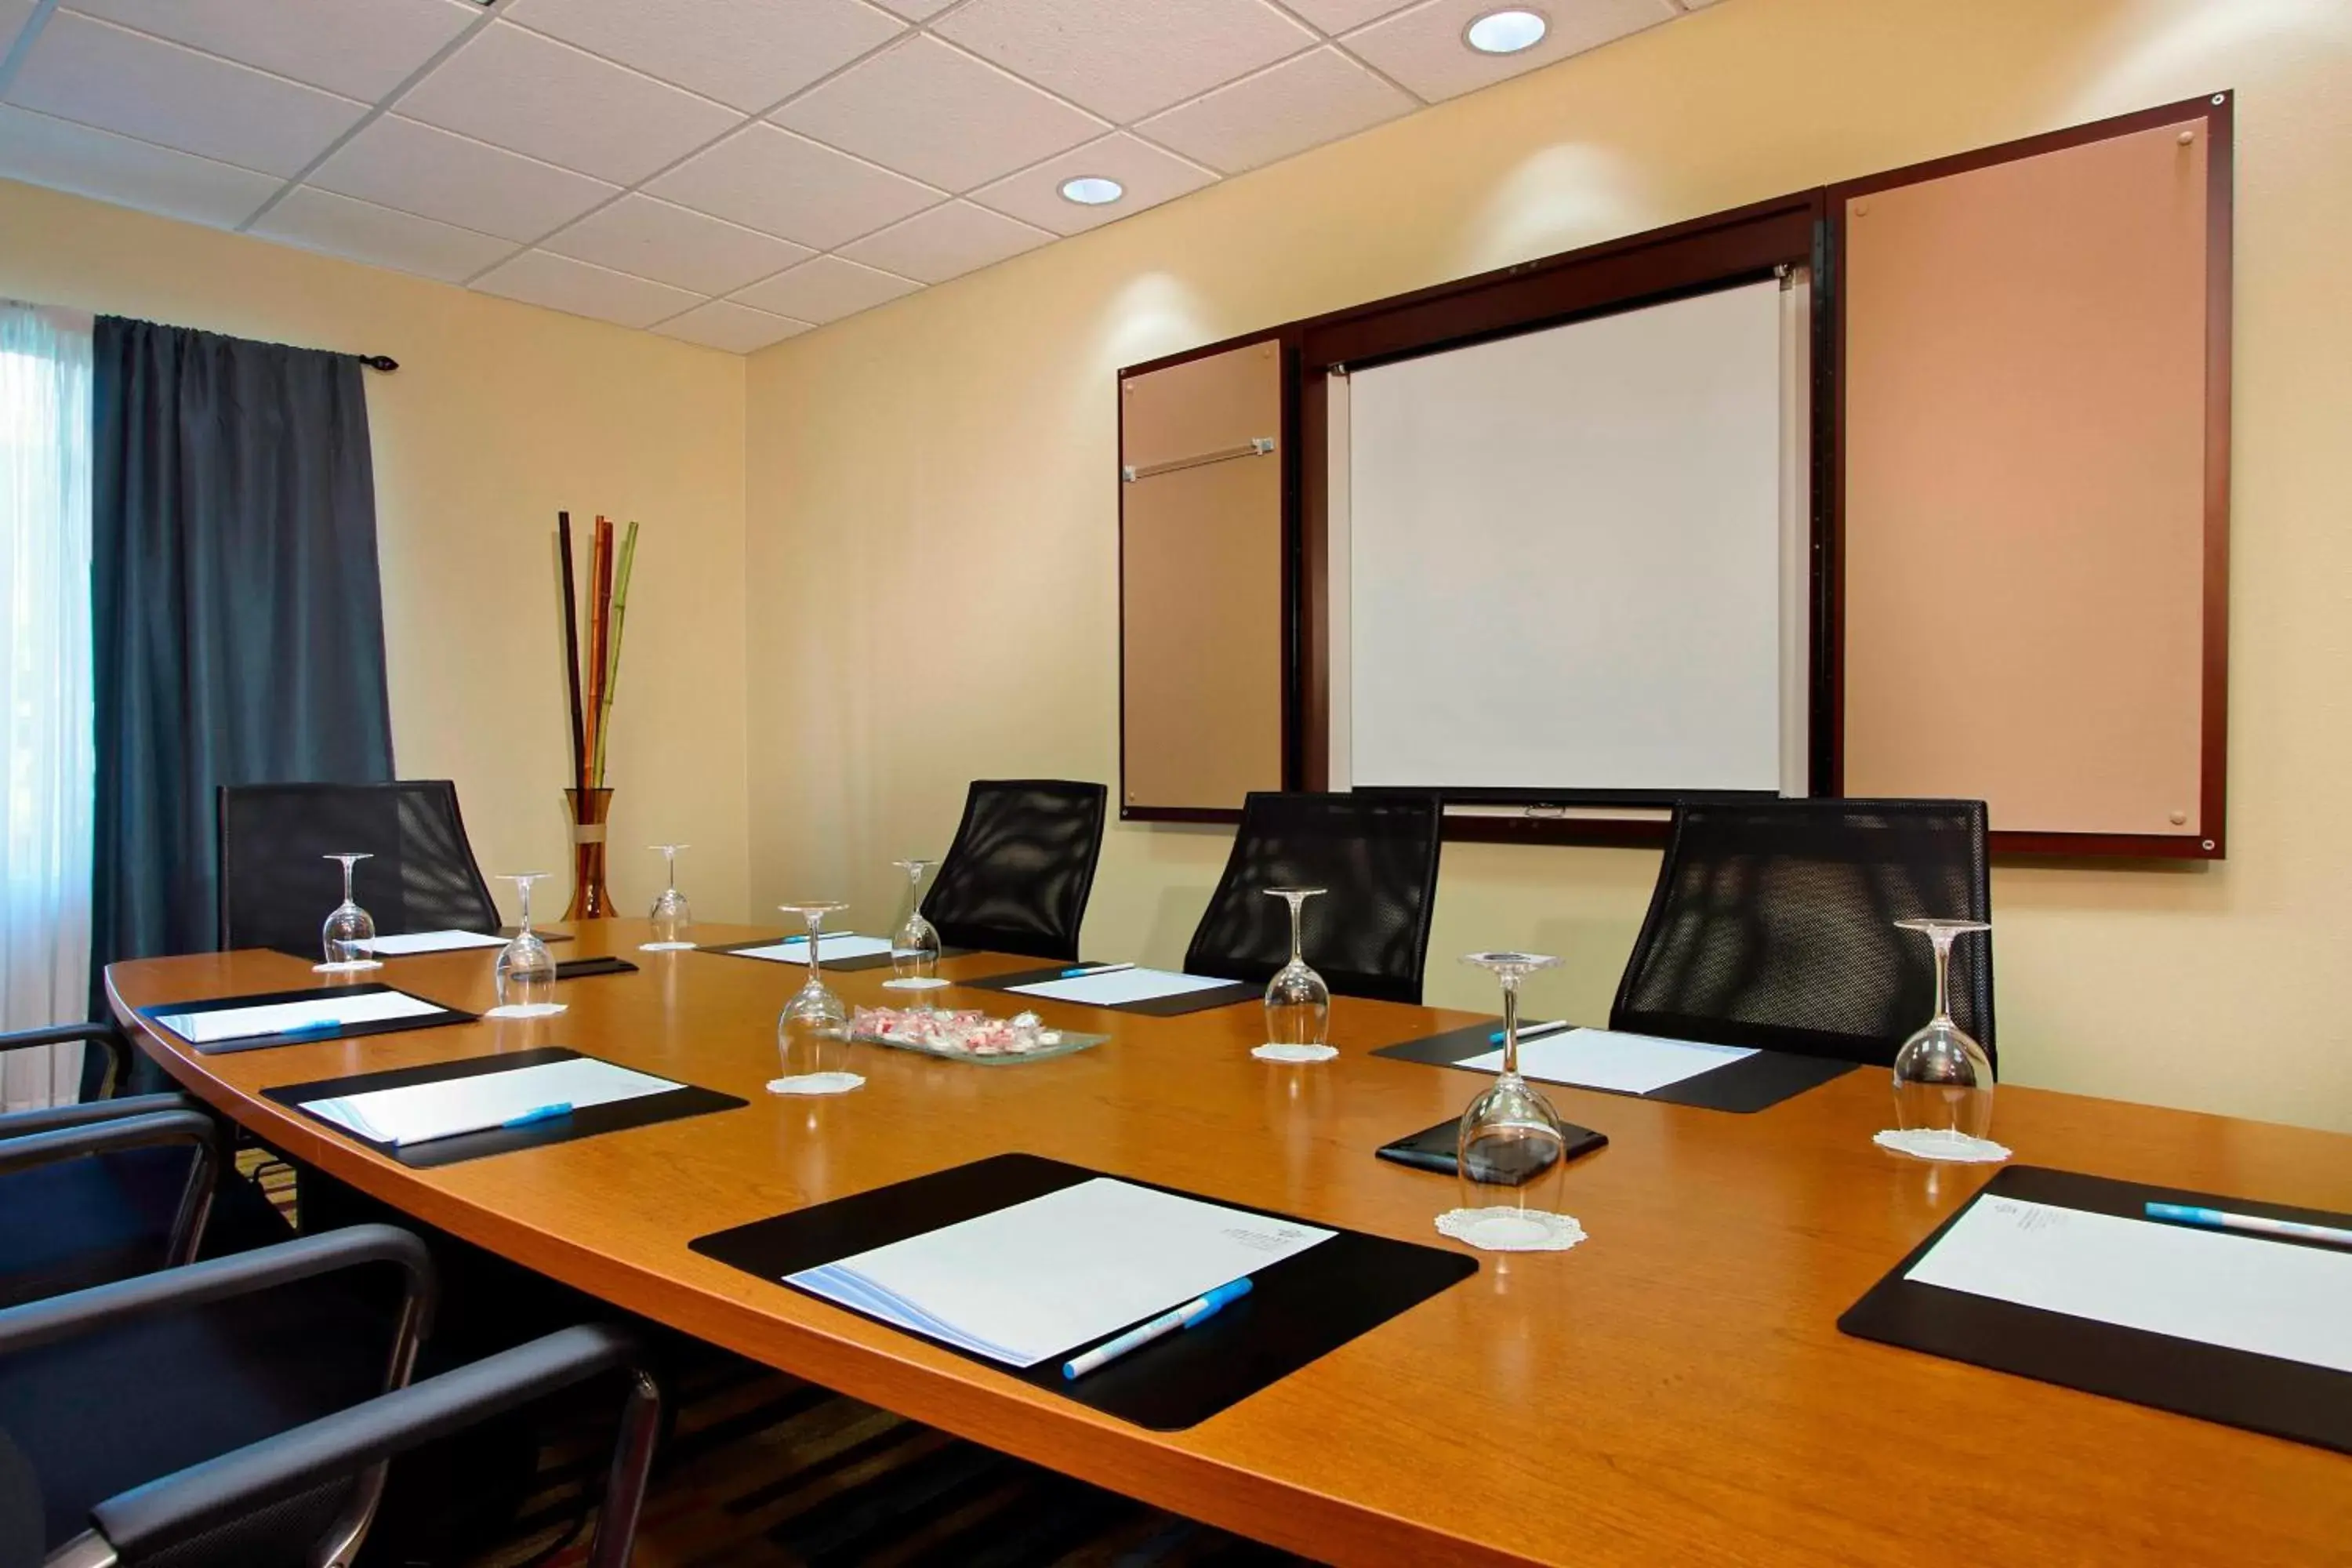 Meeting/conference room in Fairfield Inn & Suites Fort Lauderdale Airport & Cruise Port